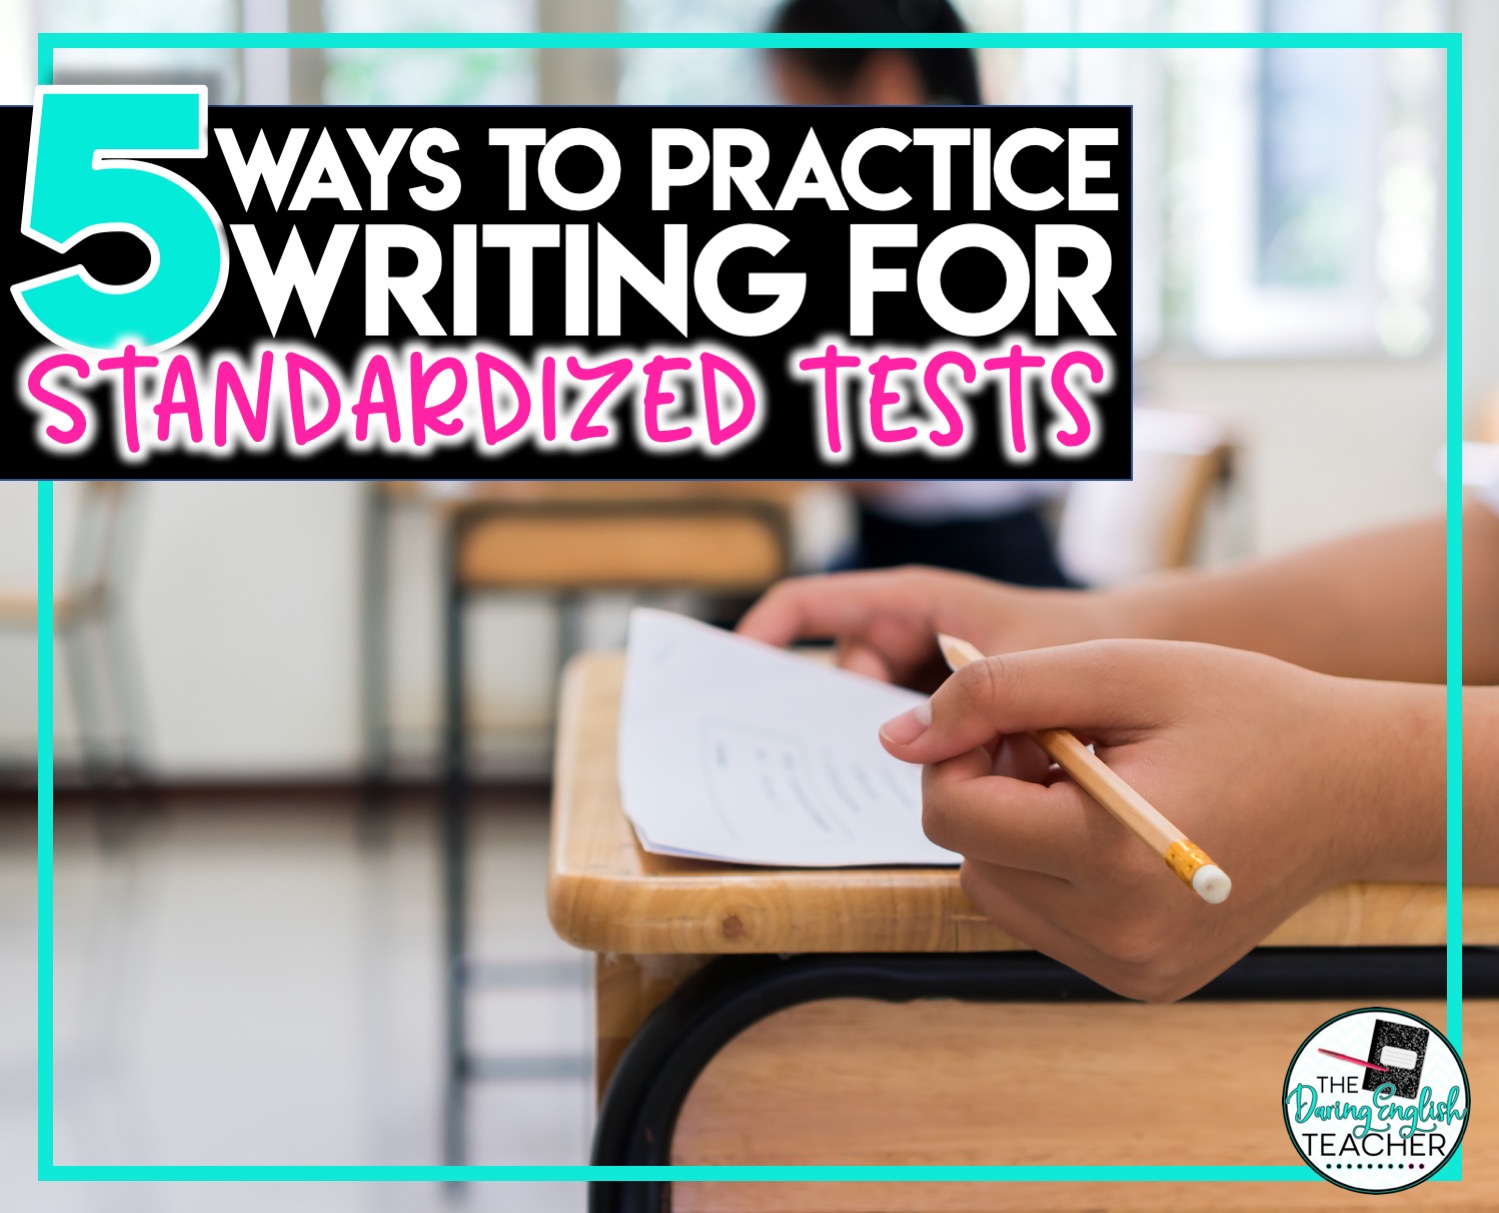 5 Ways to Practice Writing on Standardized Tests